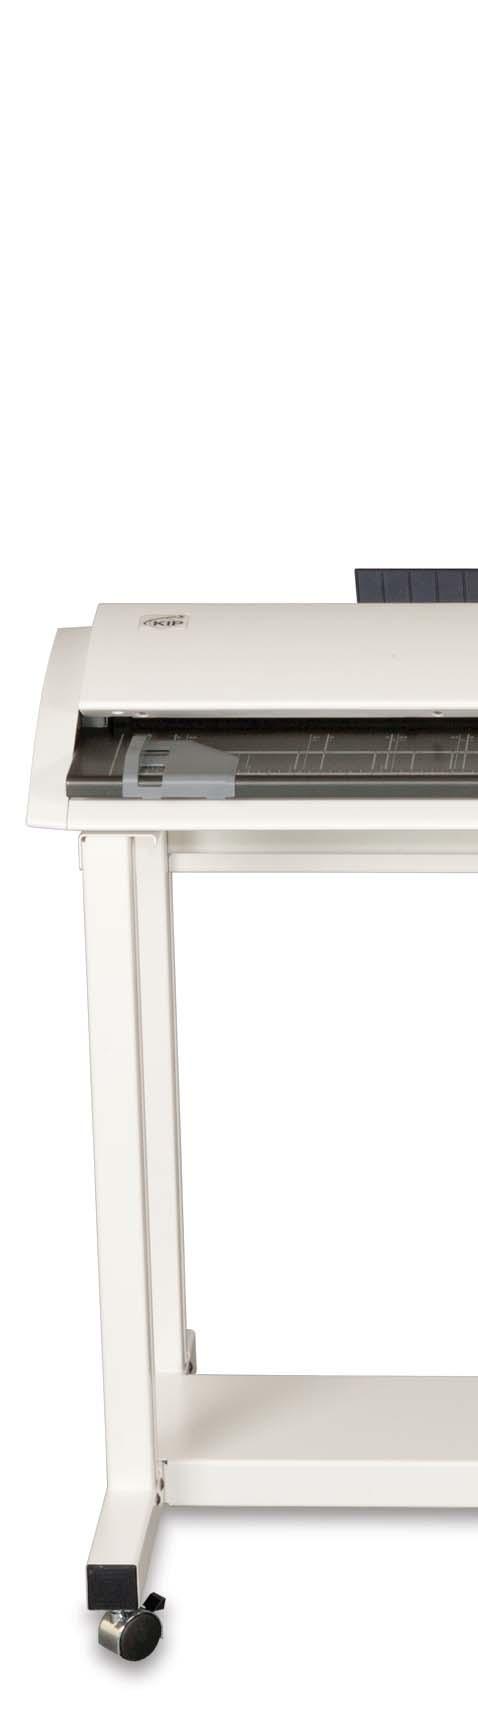 KIP 720 SCANNING SYSTEM KIP 720 Image Scanner The KIP 720 color & monochrome scanner delivers large-format scanning and copying functionality with world-class scanning speeds and unbeatable image